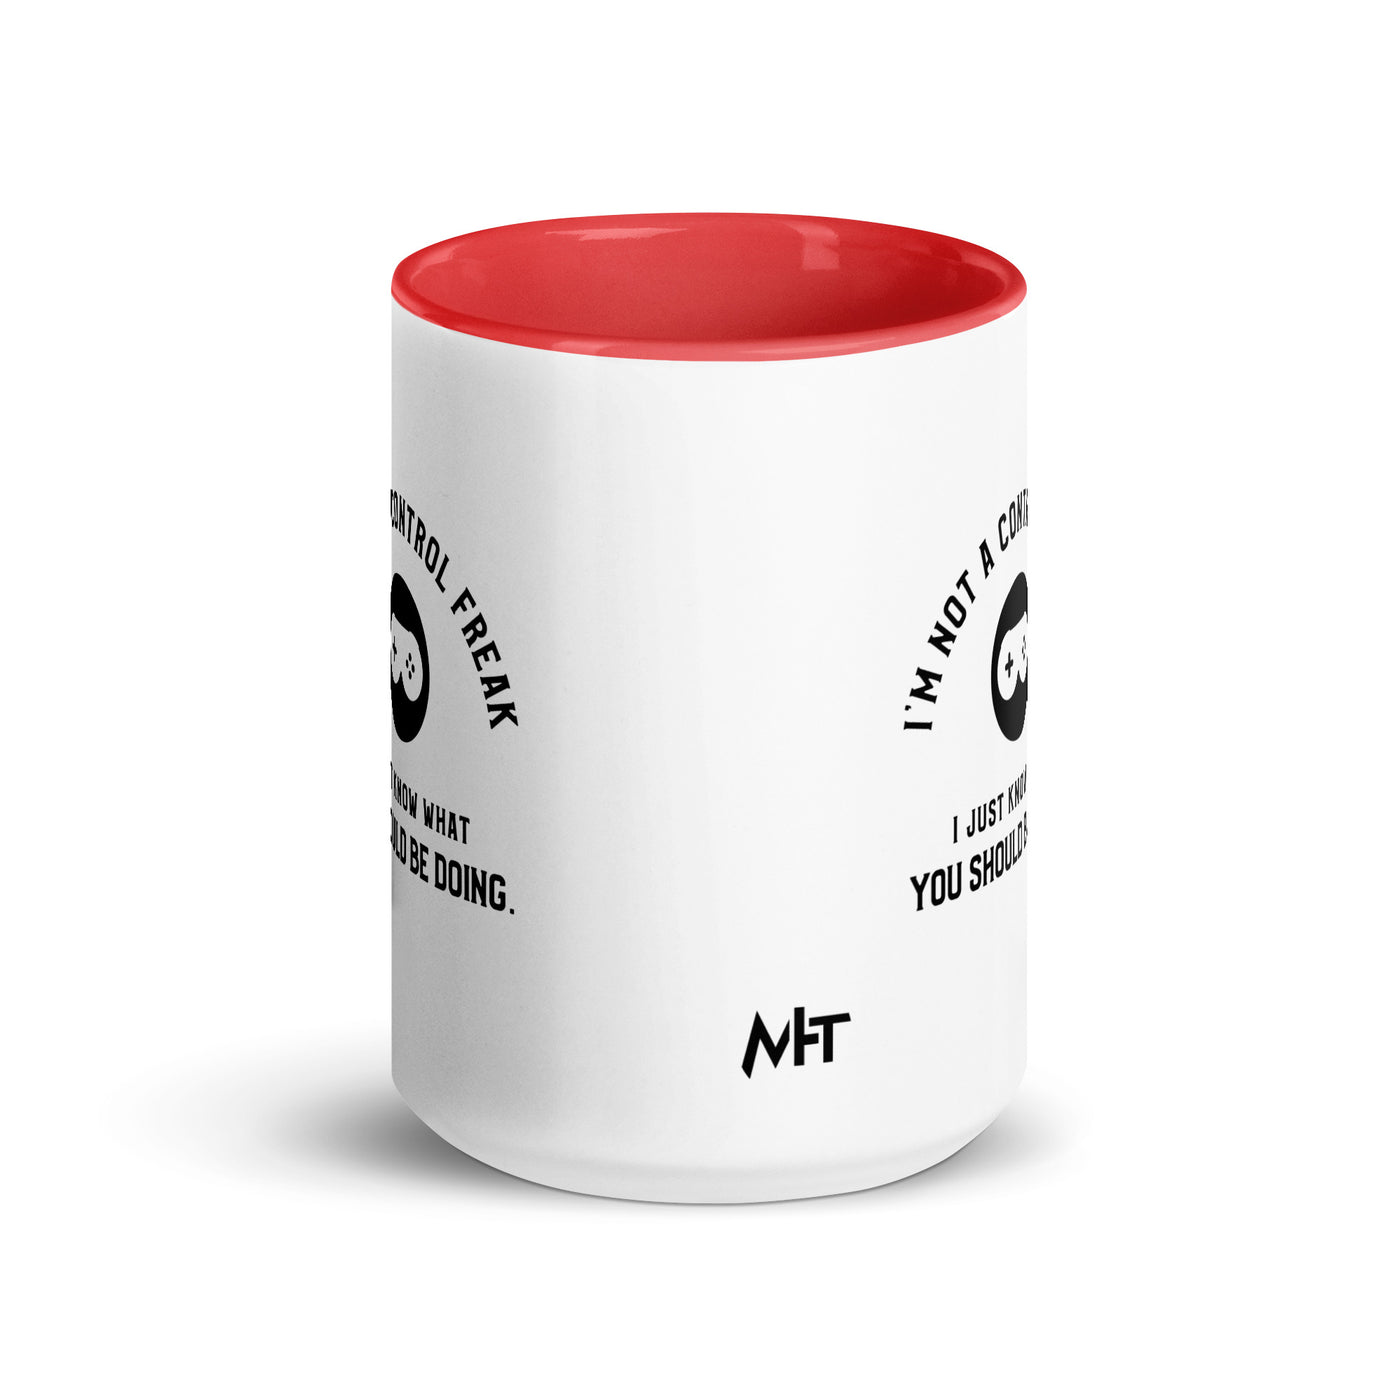 I am not a Control freak, I just Know what you should be doing - Mug with Color Inside